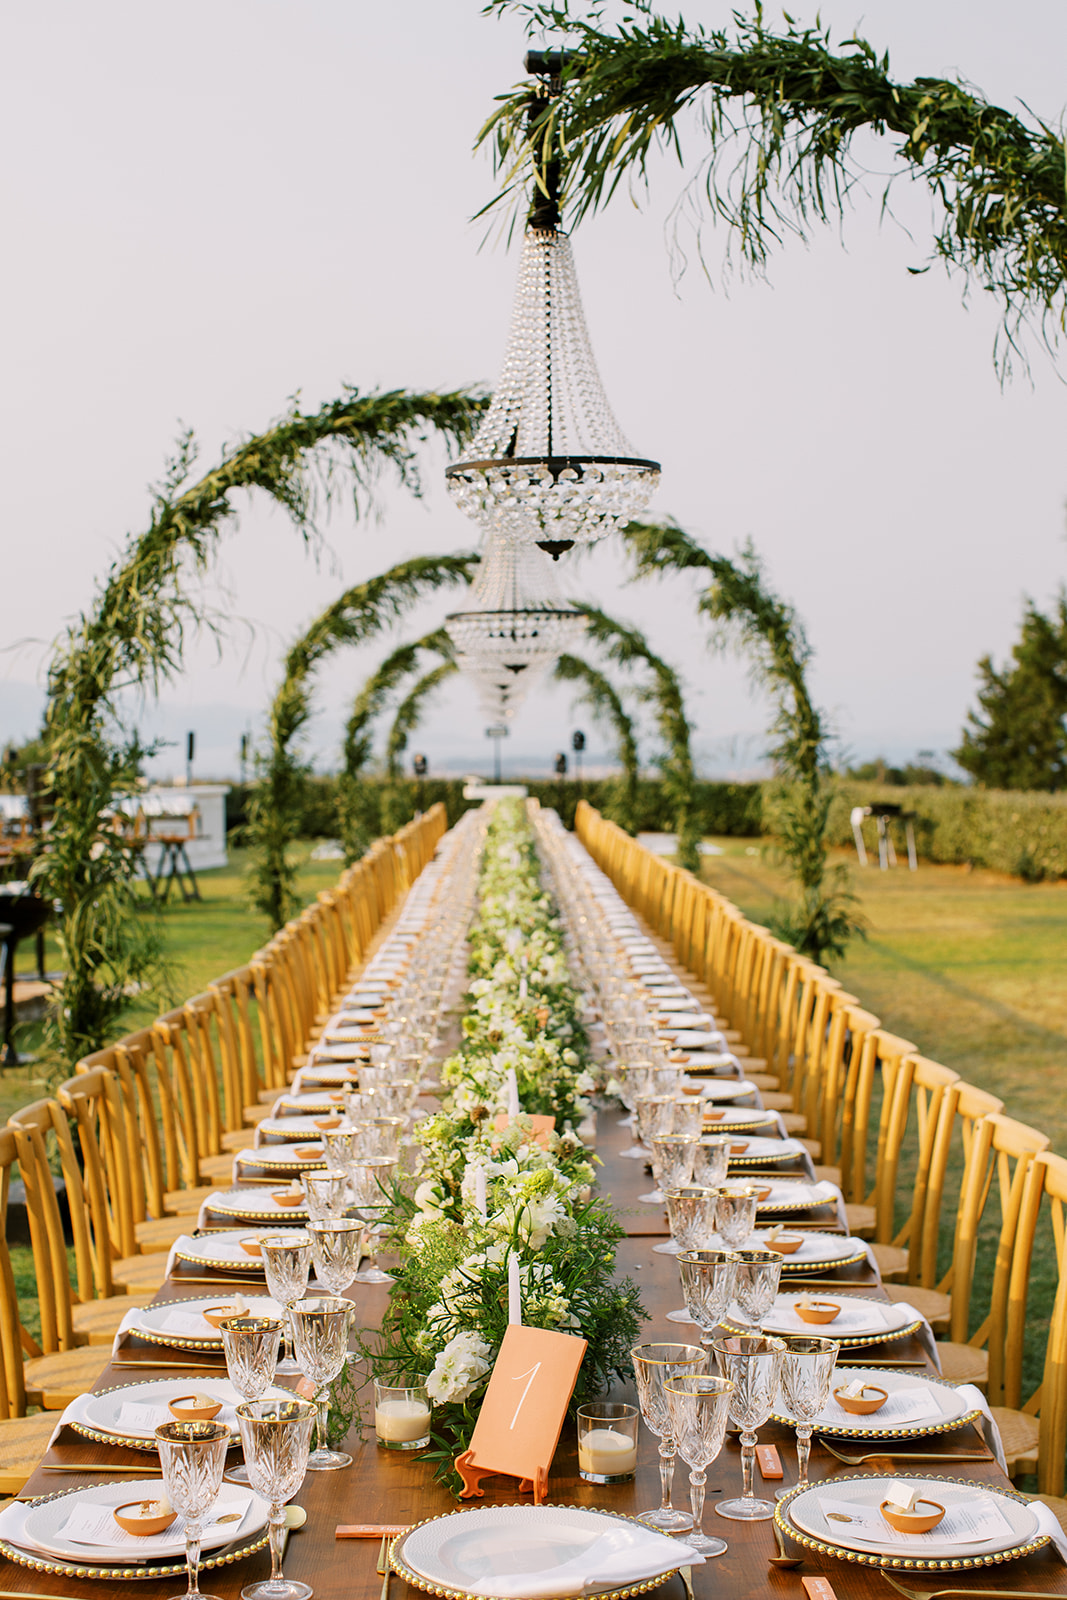 long banquet table for wedding reception